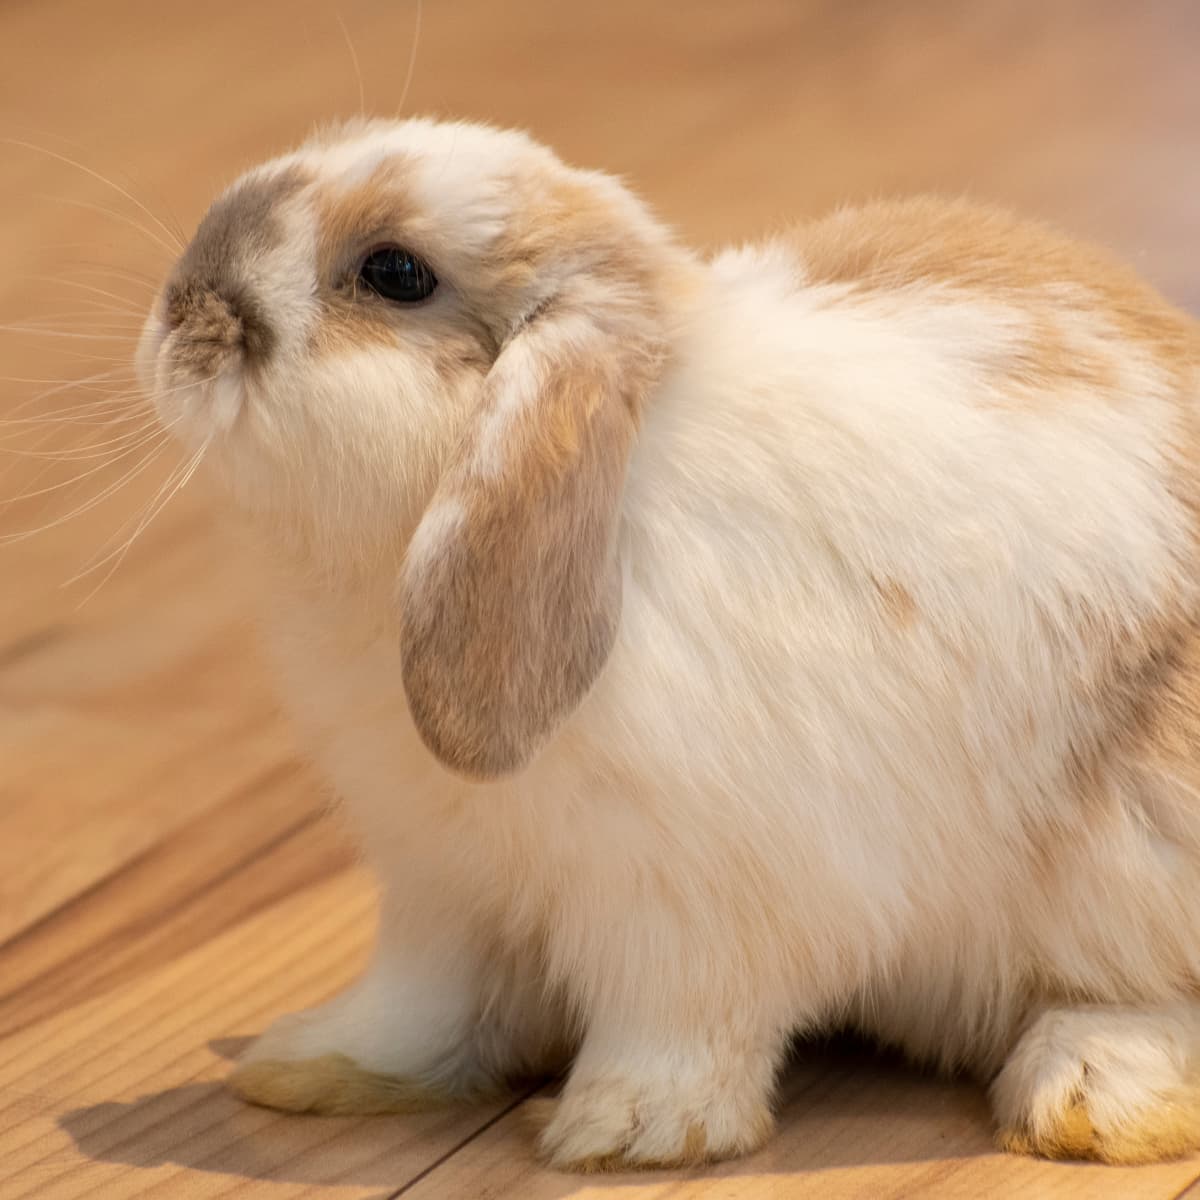 Bunny yoga organizers hope to find homes for abandoned bunnies